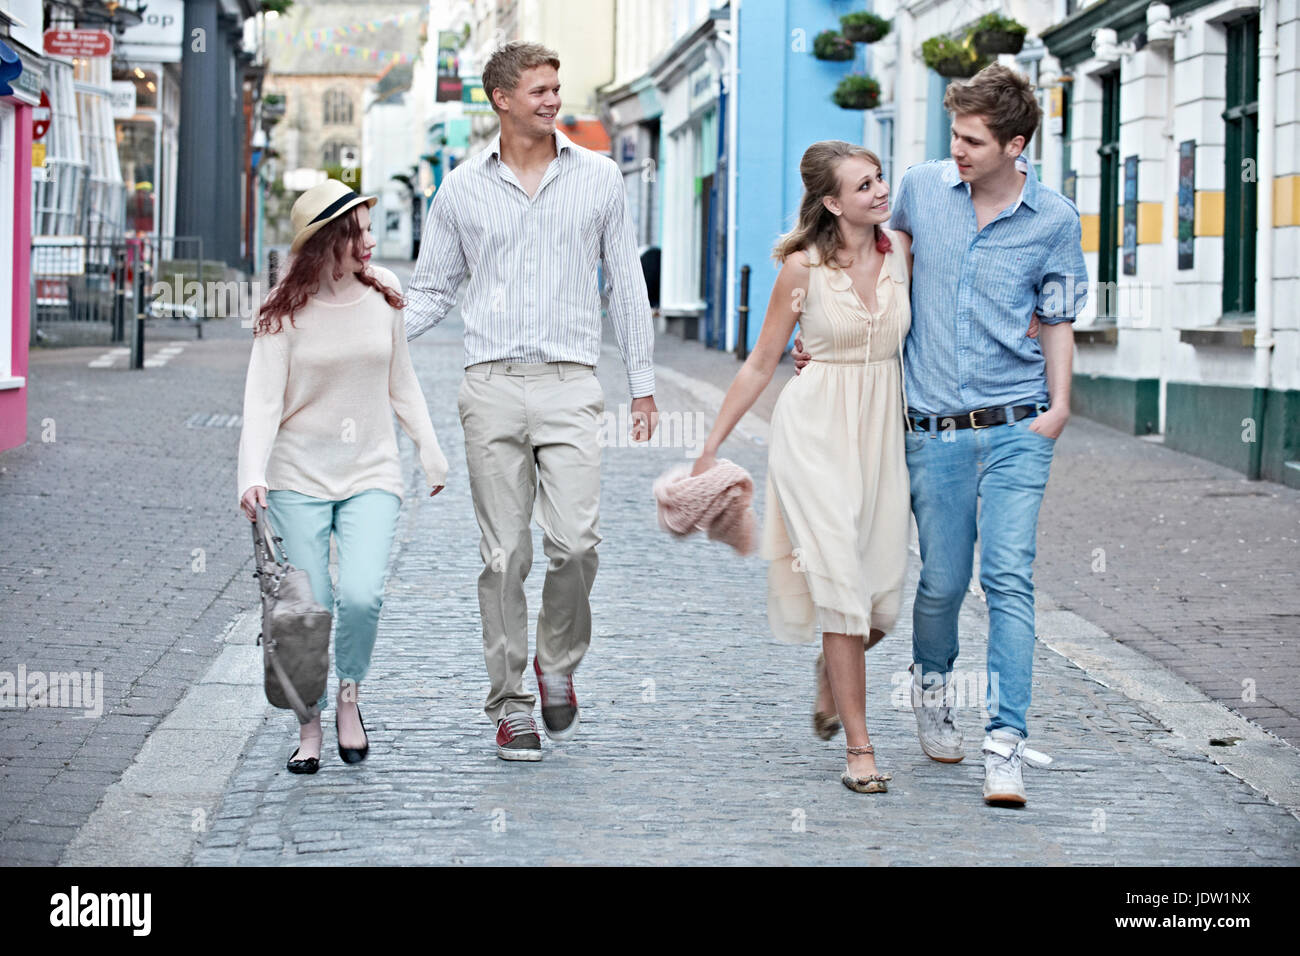 Couples walking together on city street Stock Photo